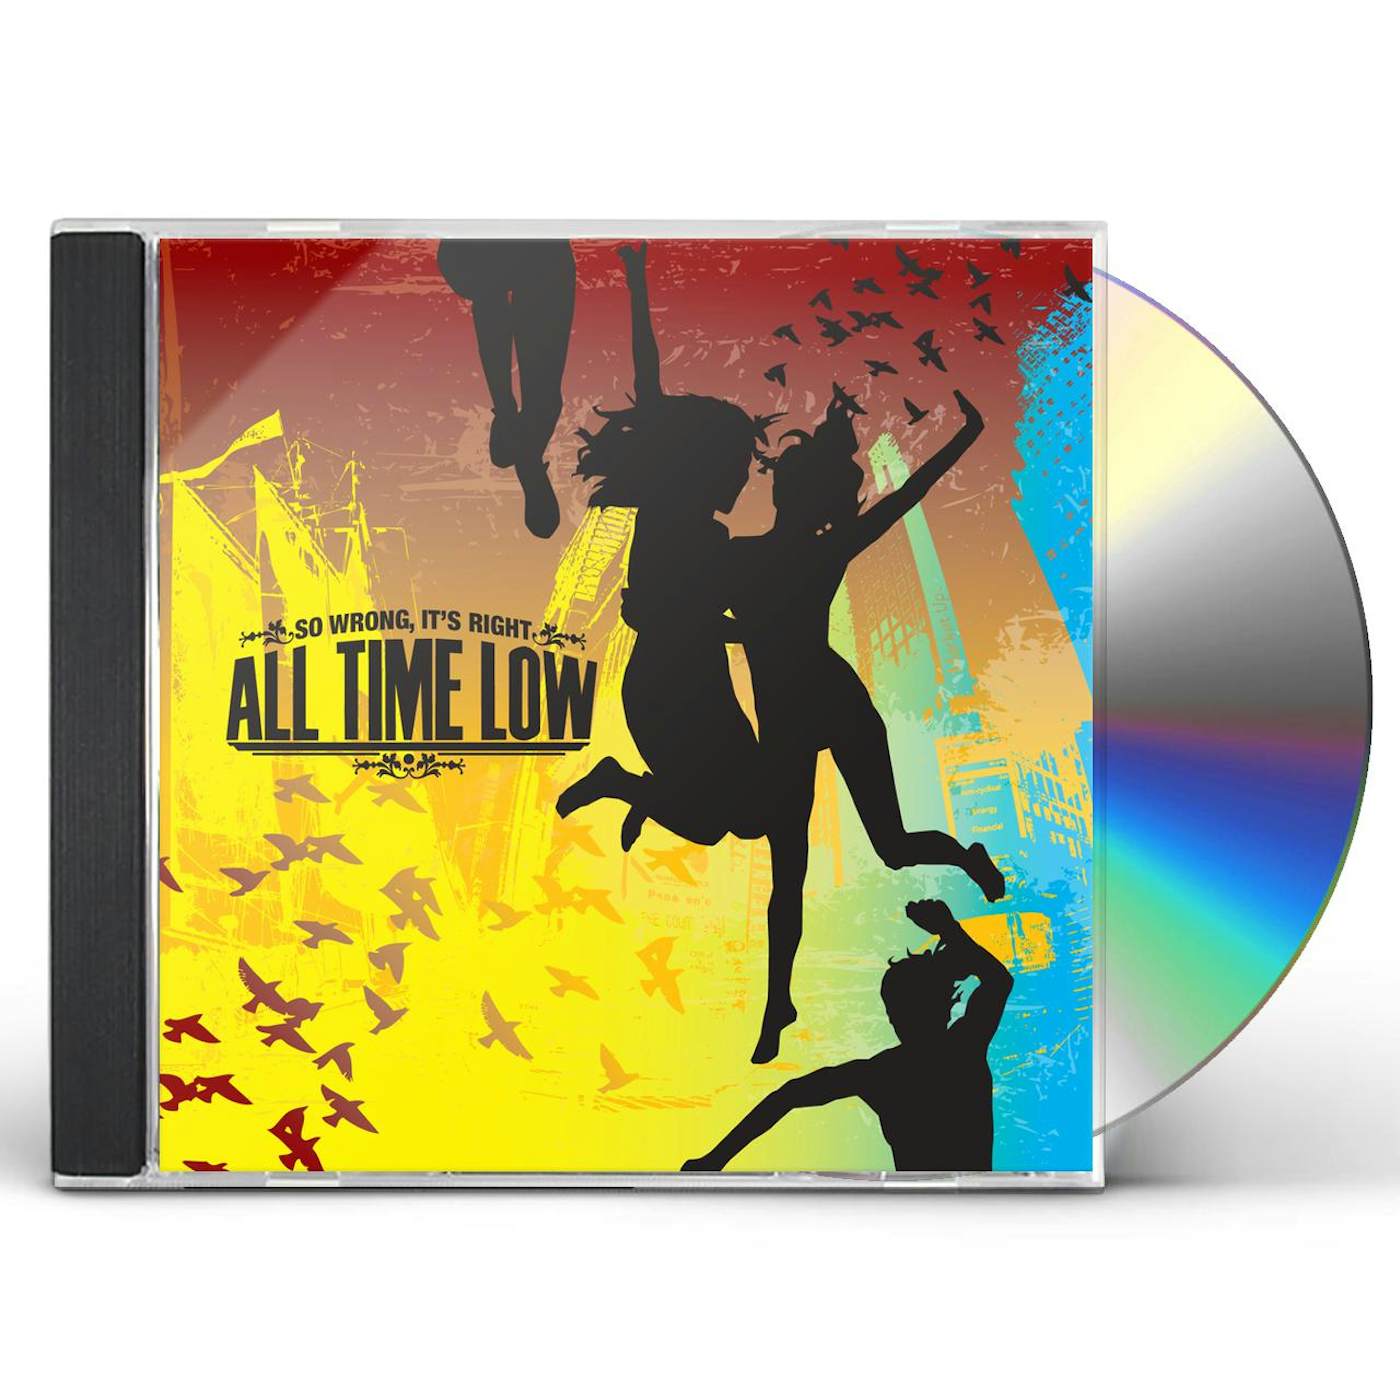 All Time Low SO WRONG IT'S RIGHT CD